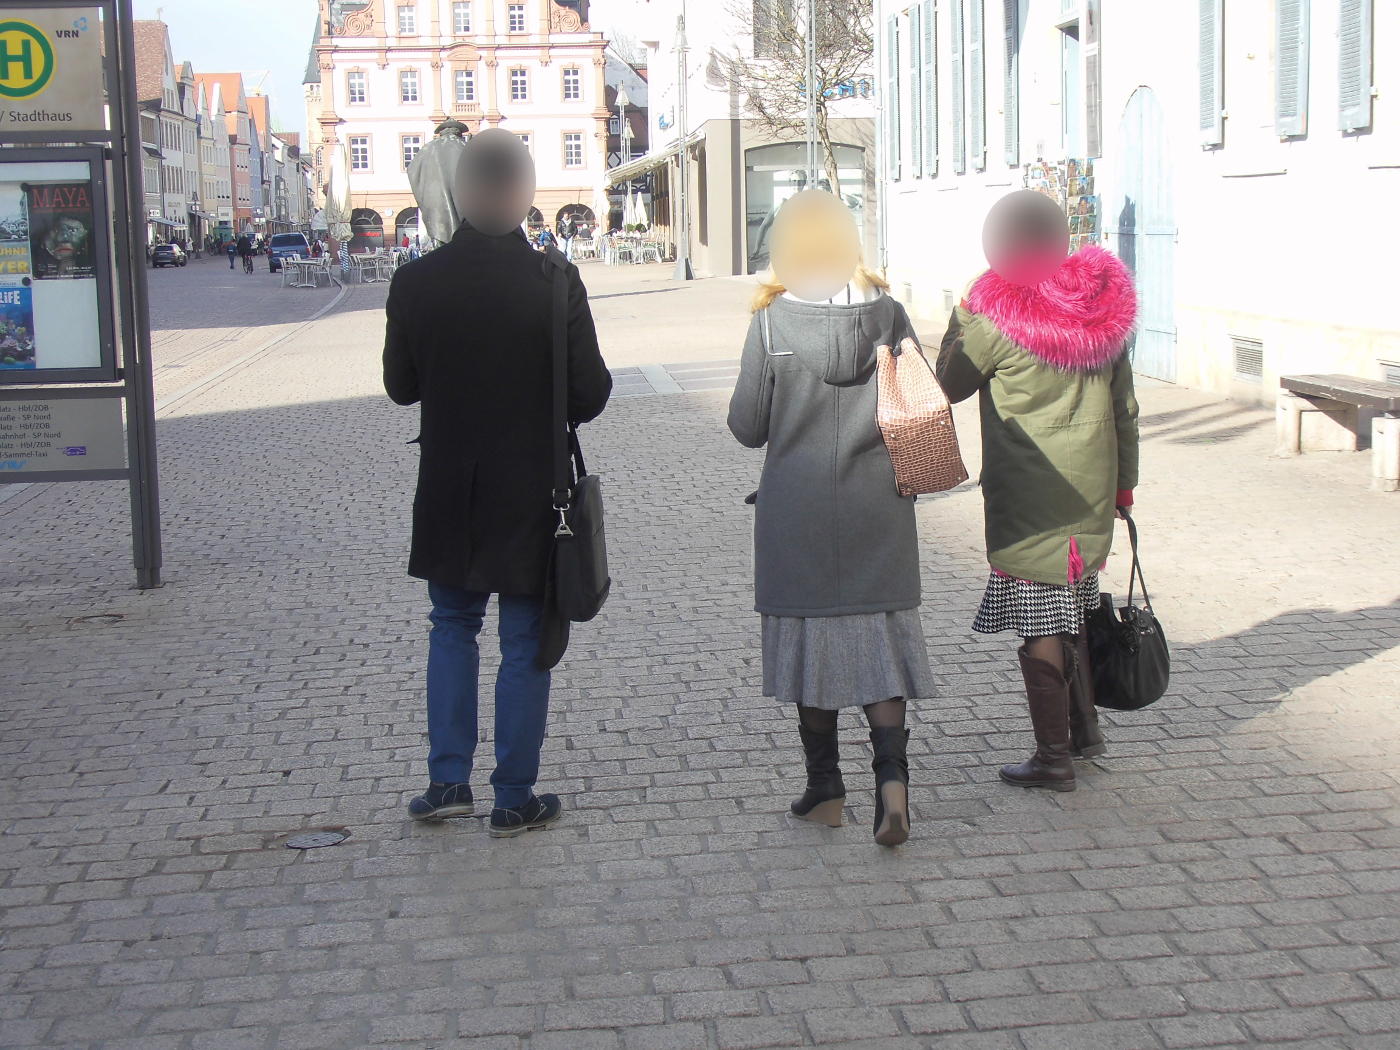 Jehovah's Witnesses back in Bruchsal